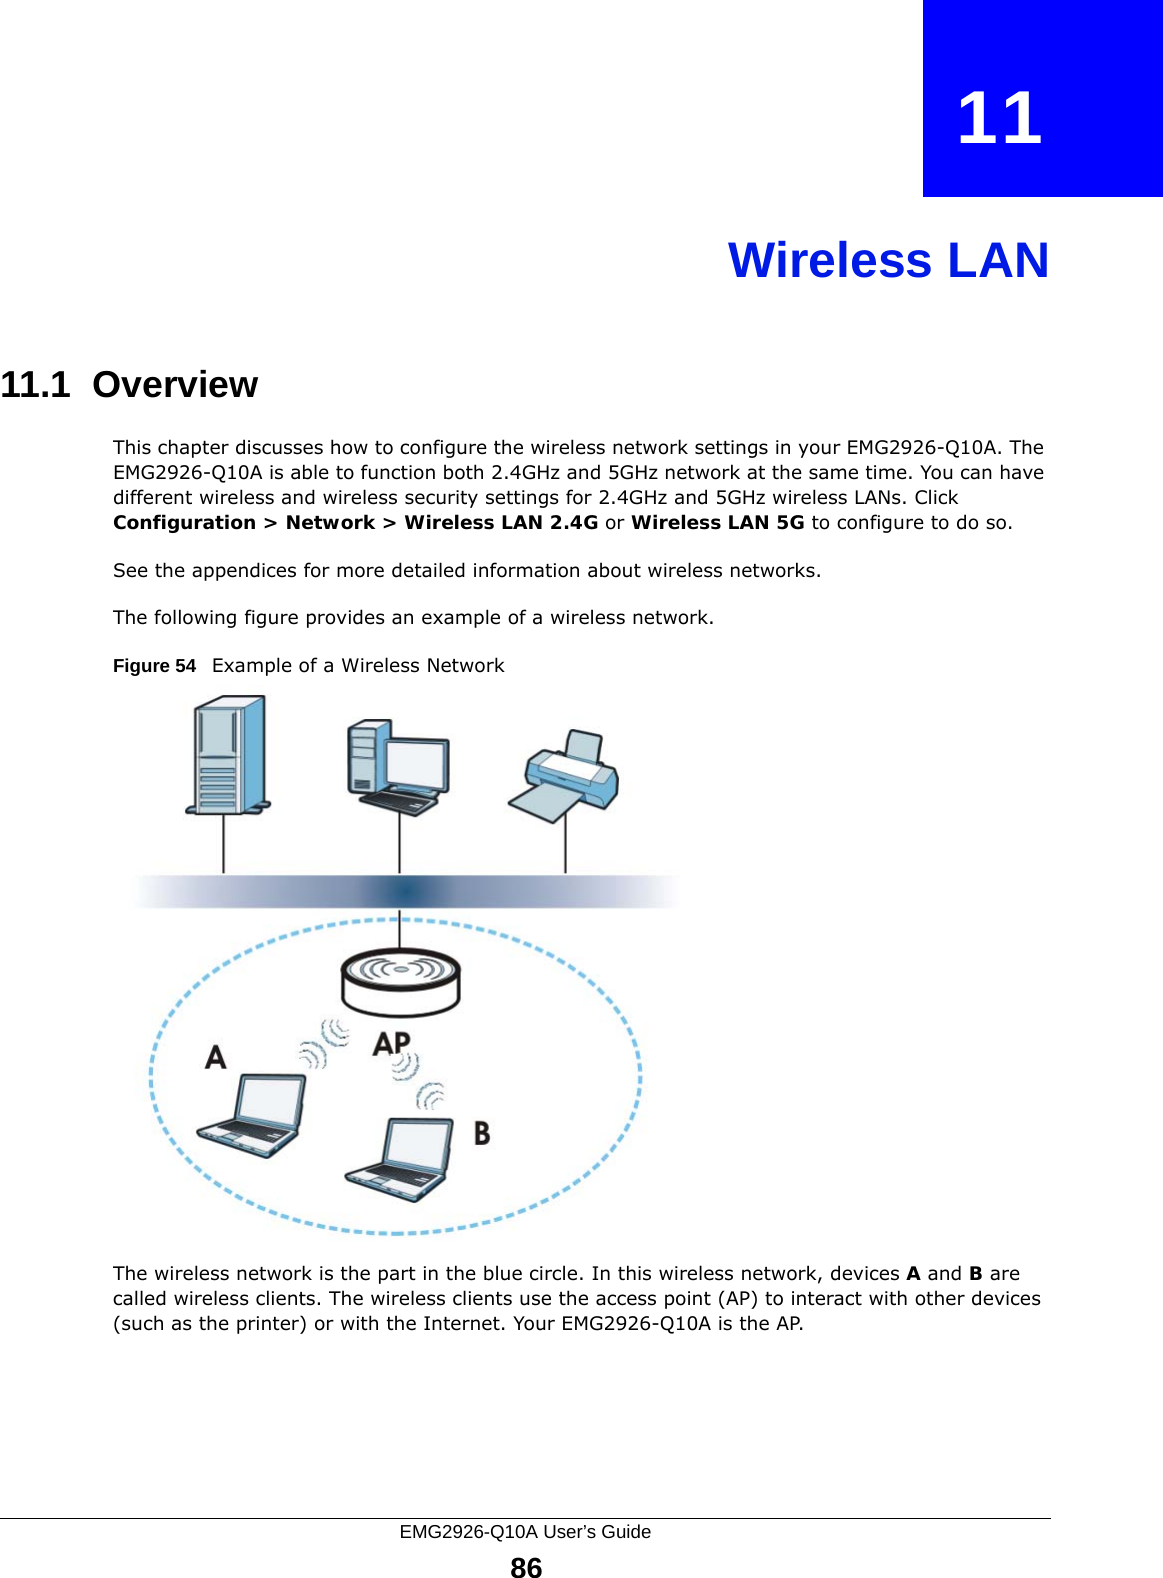 EMG2926-Q10A User’s Guide86CHAPTER   11Wireless LAN11.1  OverviewThis chapter discusses how to configure the wireless network settings in your EMG2926-Q10A. The EMG2926-Q10A is able to function both 2.4GHz and 5GHz network at the same time. You can have different wireless and wireless security settings for 2.4GHz and 5GHz wireless LANs. Click Configuration &gt; Network &gt; Wireless LAN 2.4G or Wireless LAN 5G to configure to do so.See the appendices for more detailed information about wireless networks.The following figure provides an example of a wireless network.Figure 54   Example of a Wireless NetworkThe wireless network is the part in the blue circle. In this wireless network, devices A and B are called wireless clients. The wireless clients use the access point (AP) to interact with other devices (such as the printer) or with the Internet. Your EMG2926-Q10A is the AP.